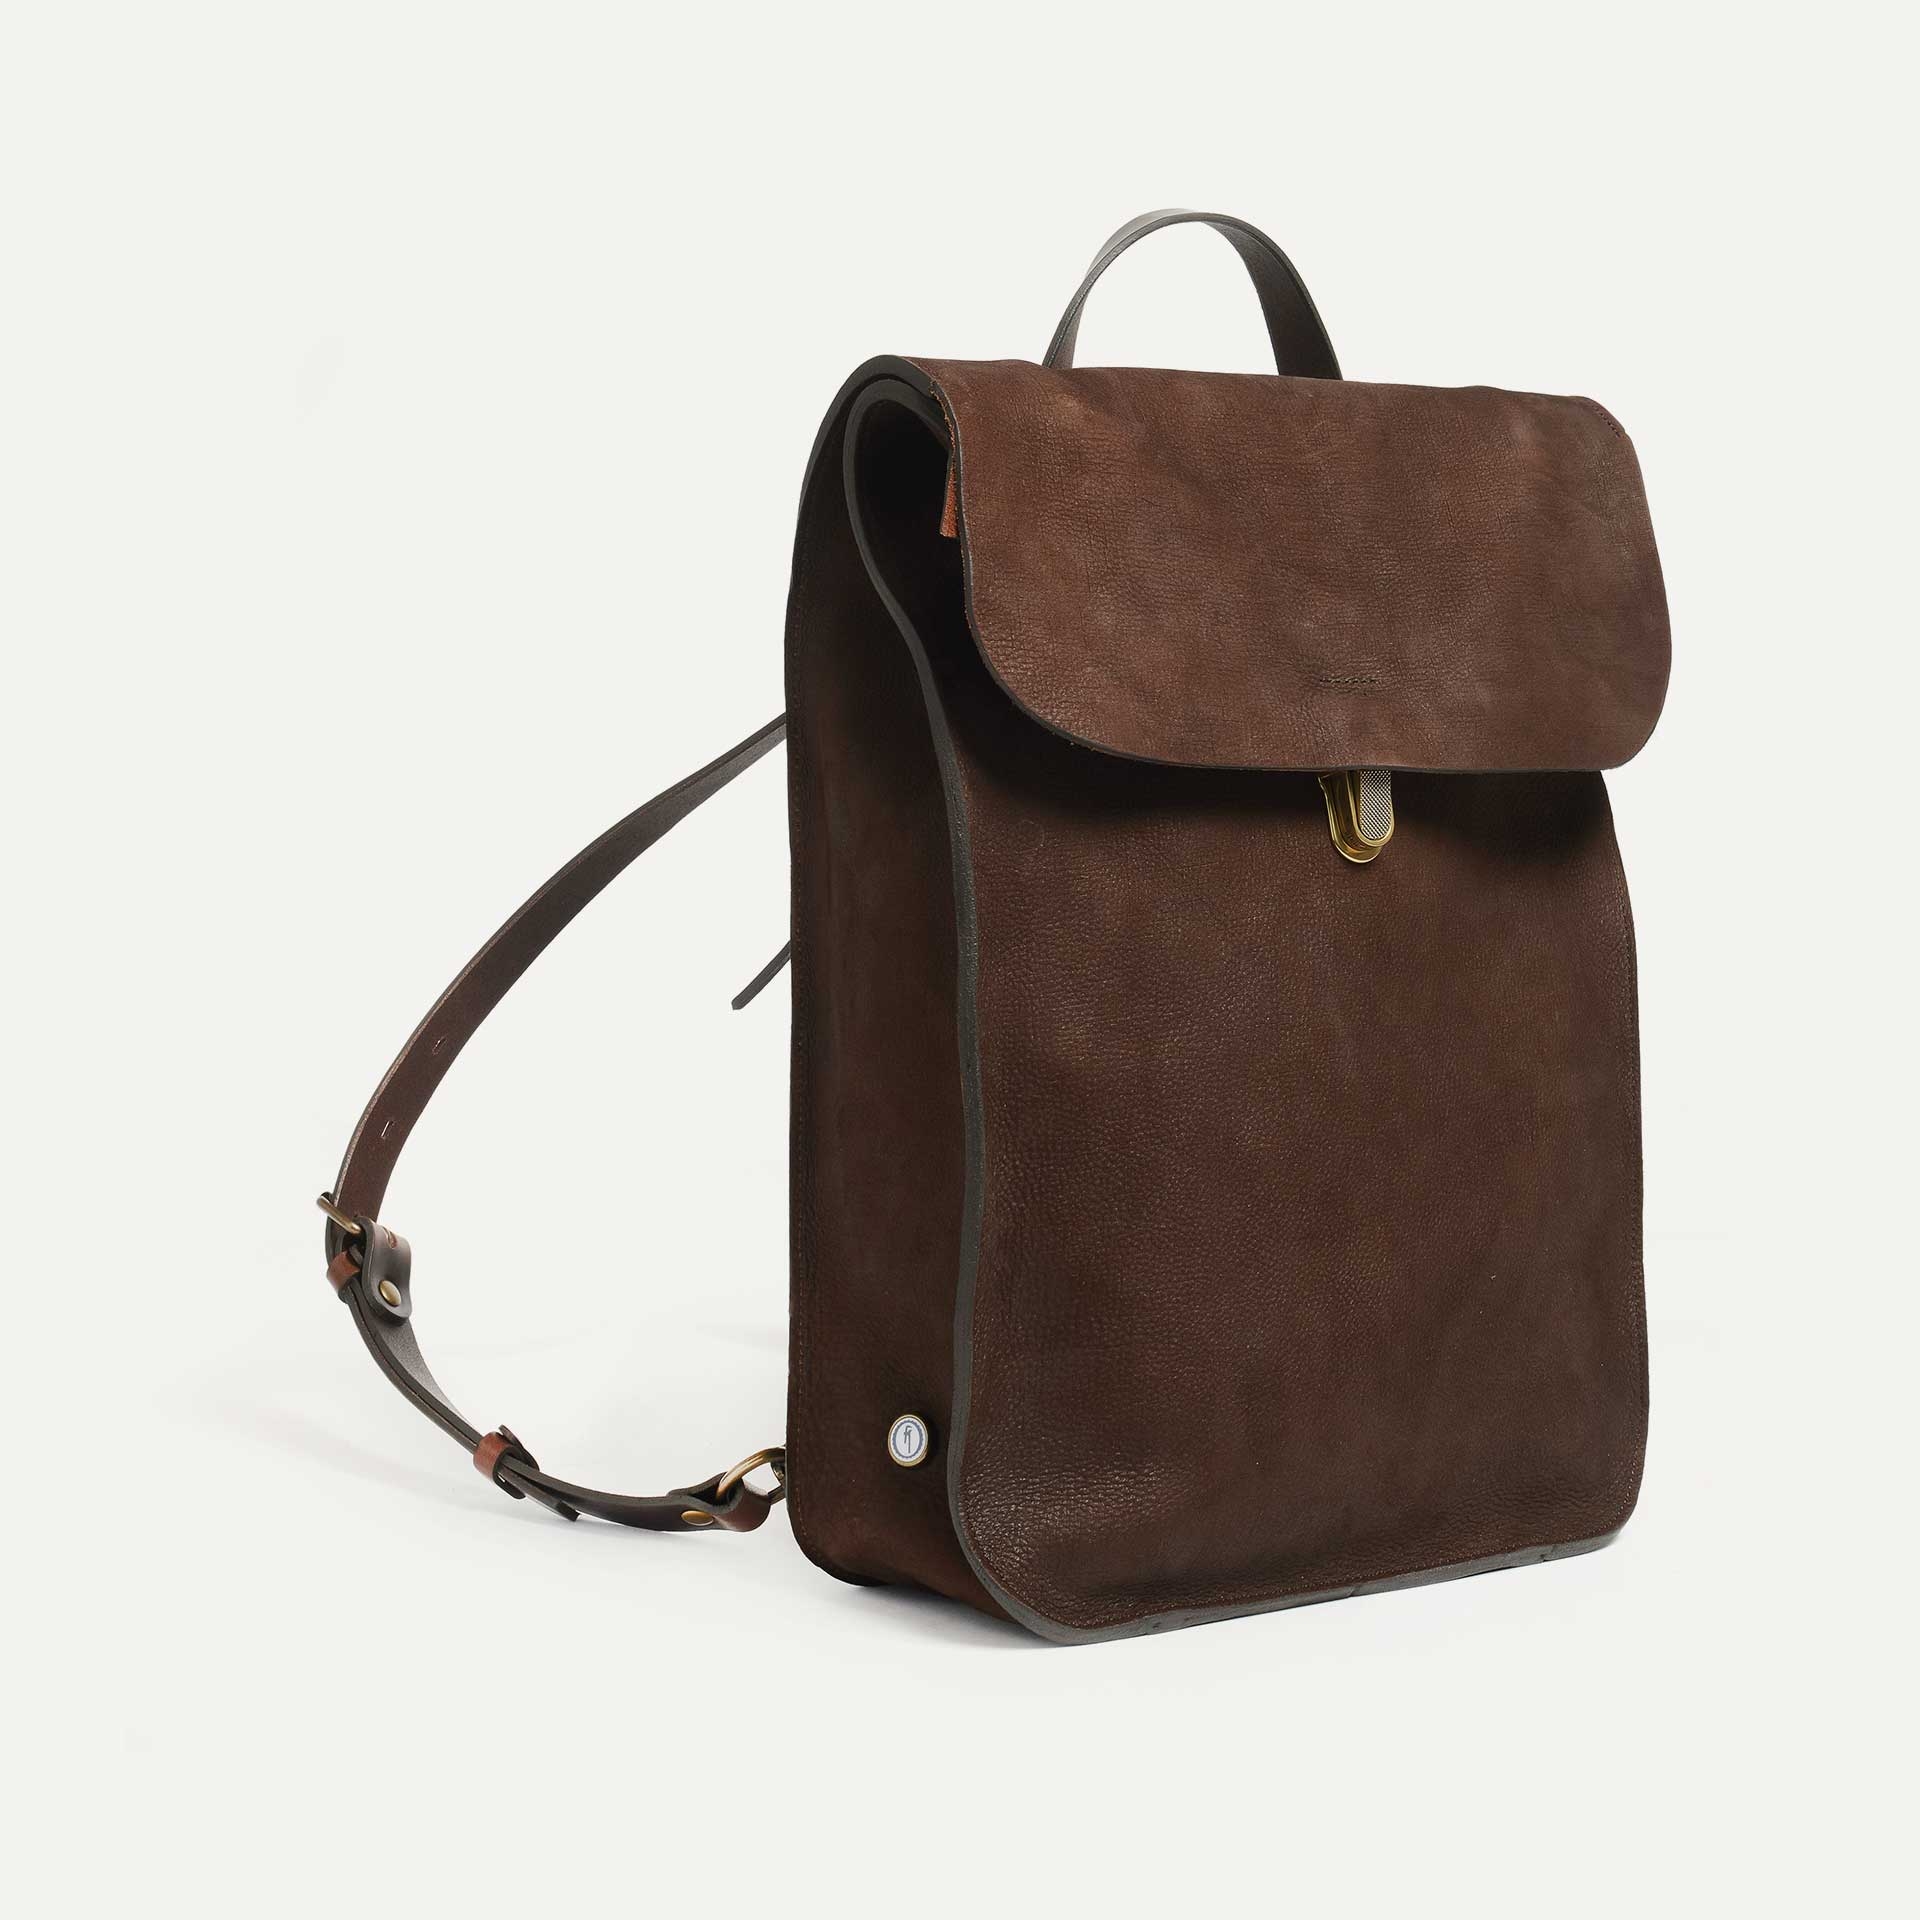 Puncho leather backpack - Coffee / Waxed Leather (image n°2)